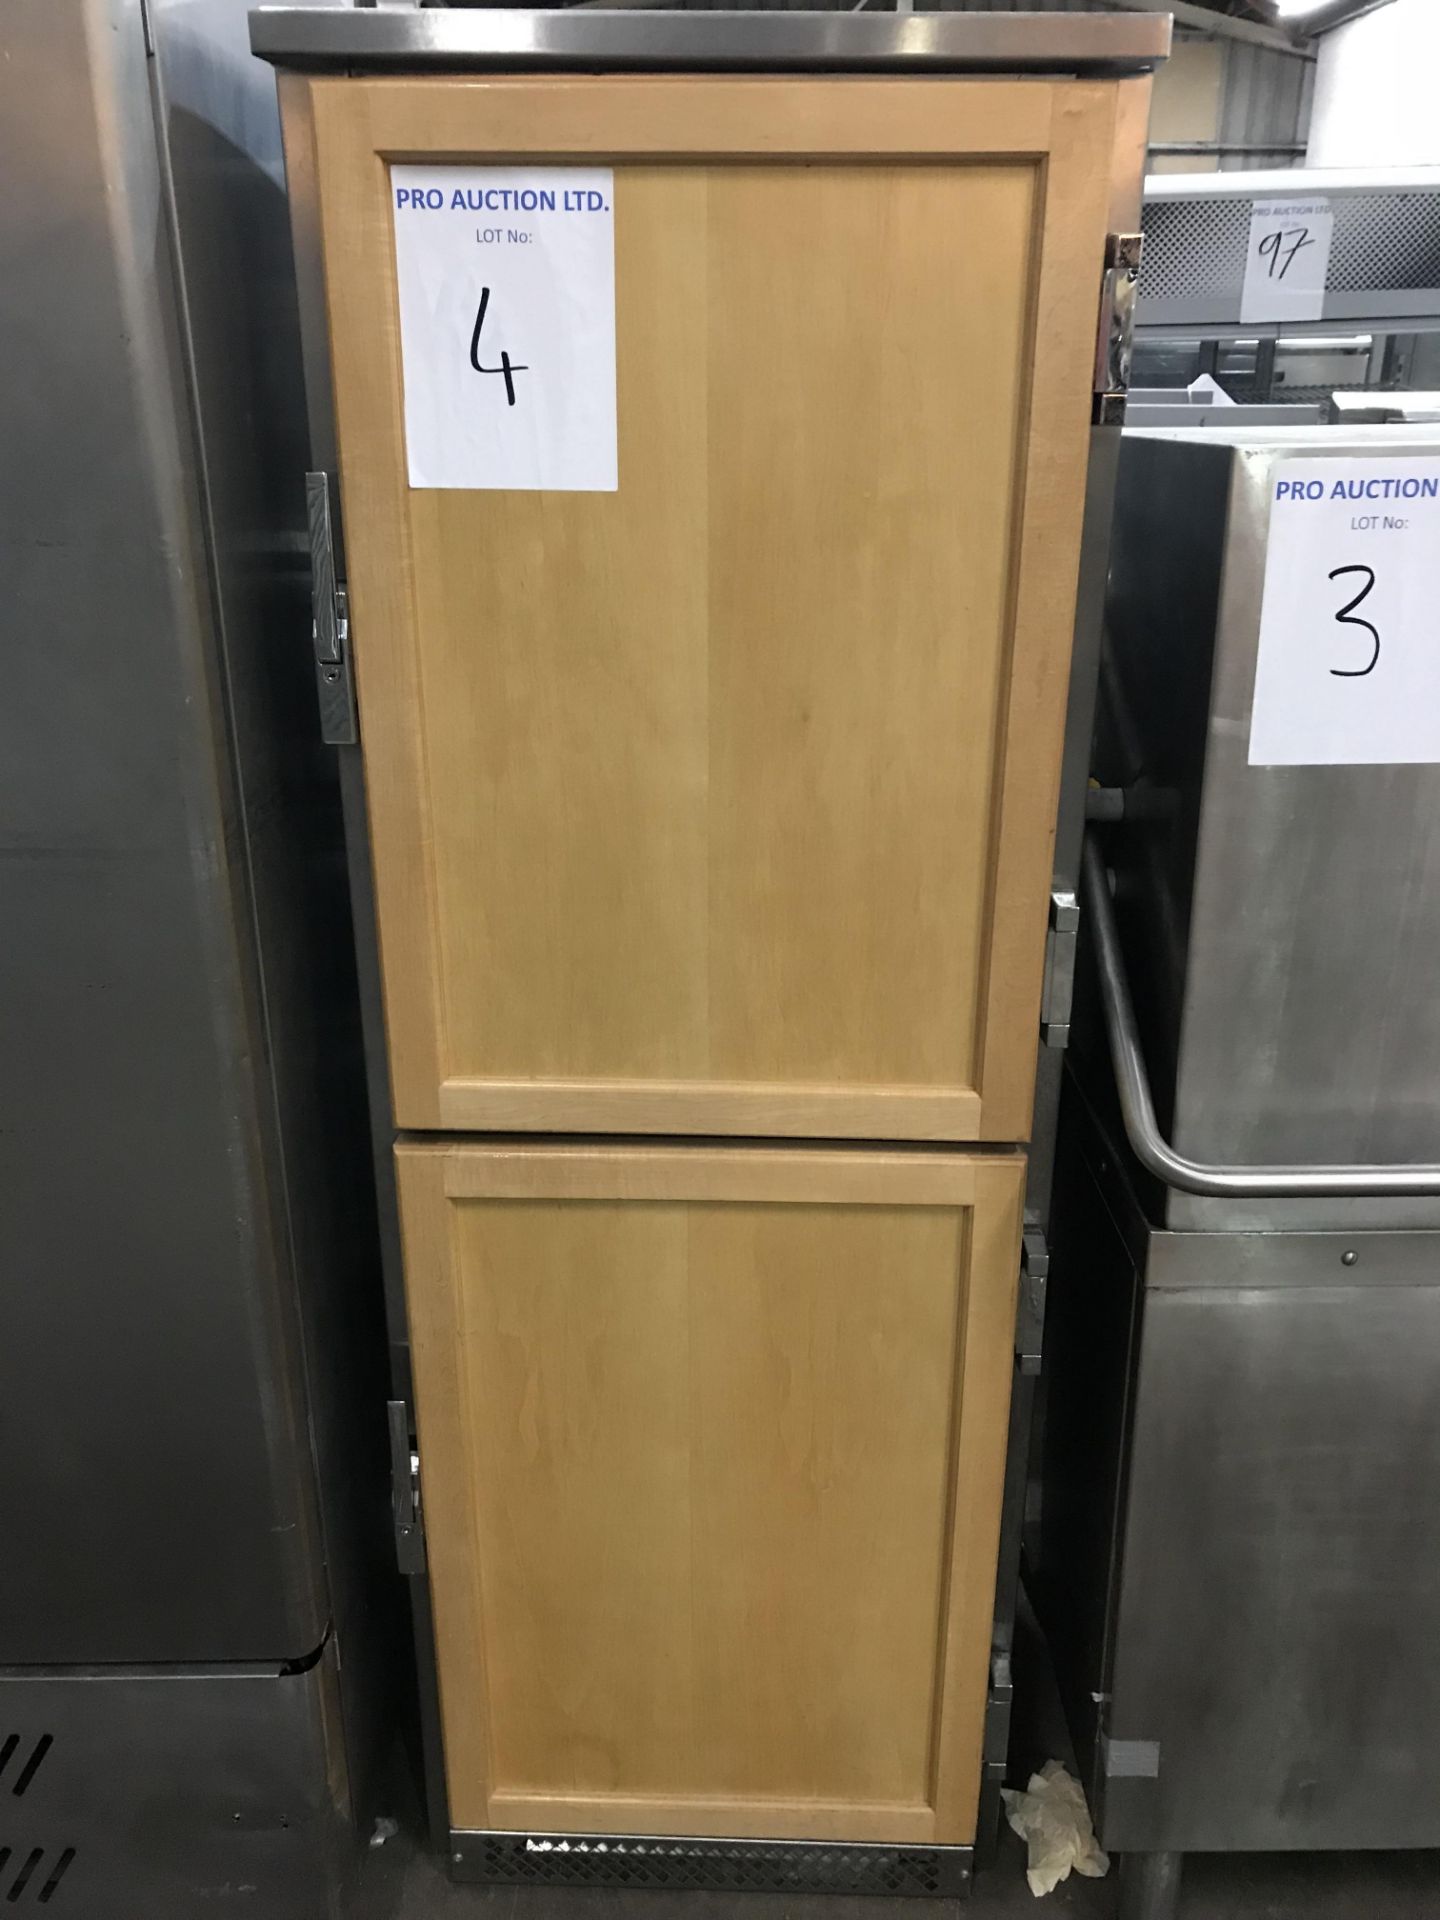 Weald WM52H upright two door refrigerator temperature range: +3/+7 units fitted in wooden case